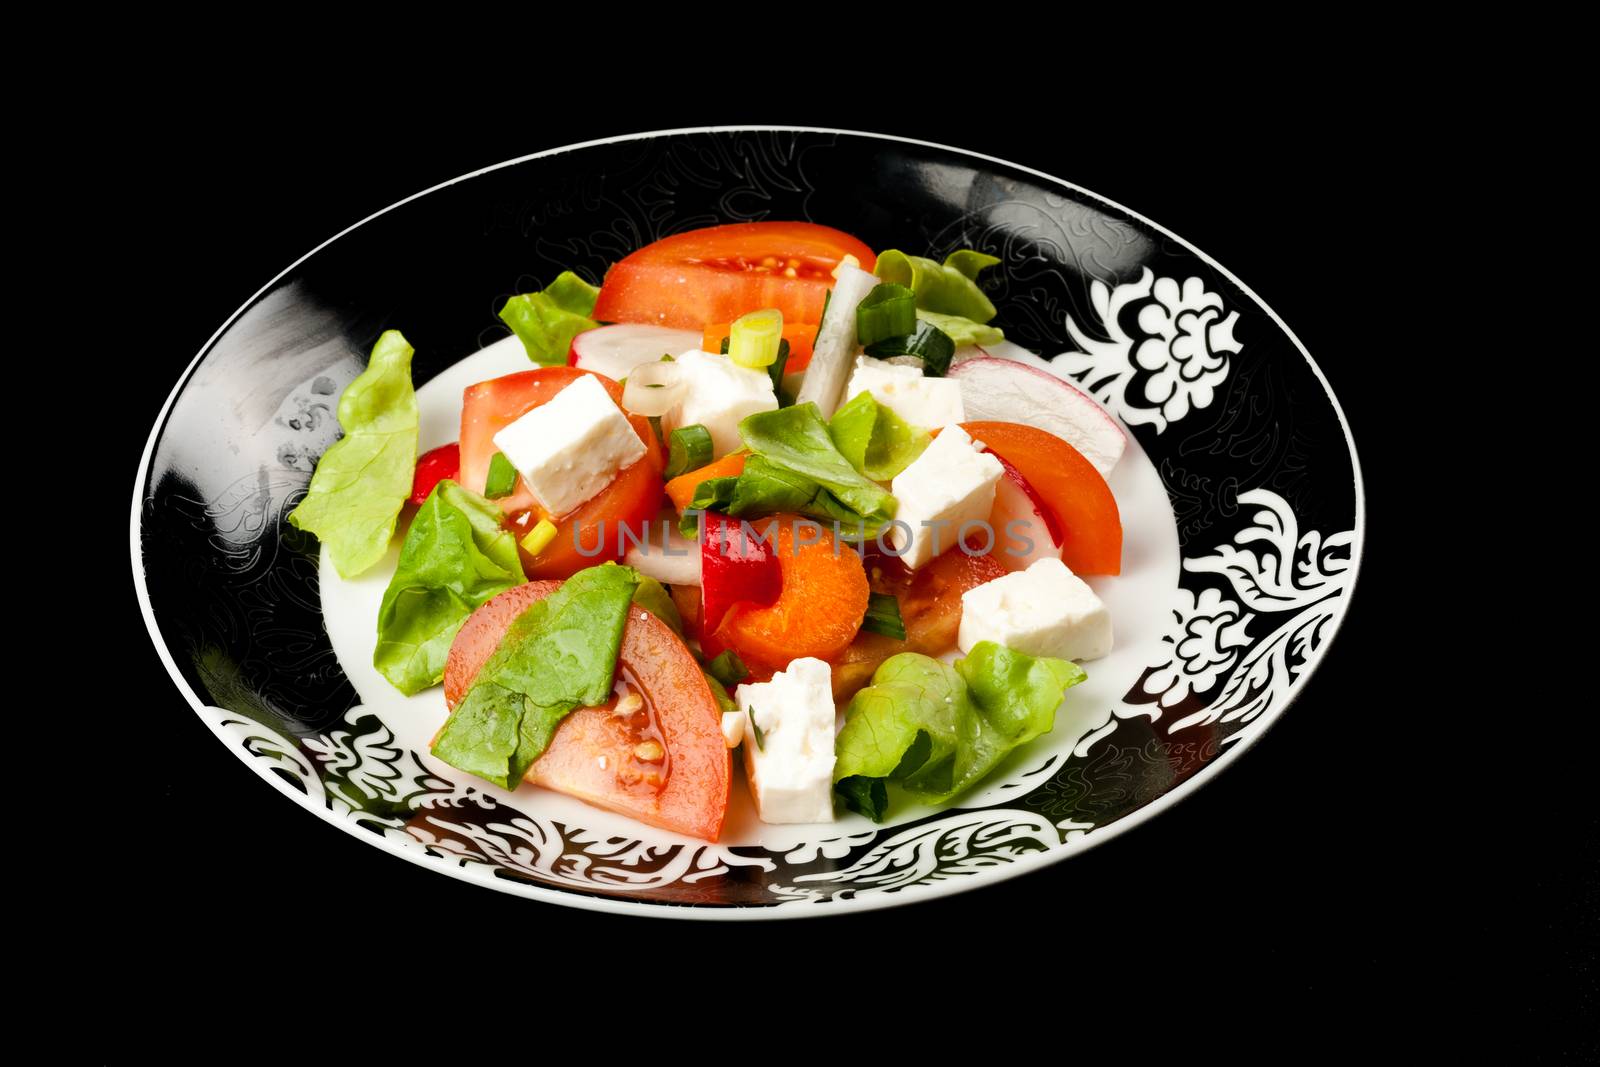 vegetable salad in stylish balck and white plate on black background